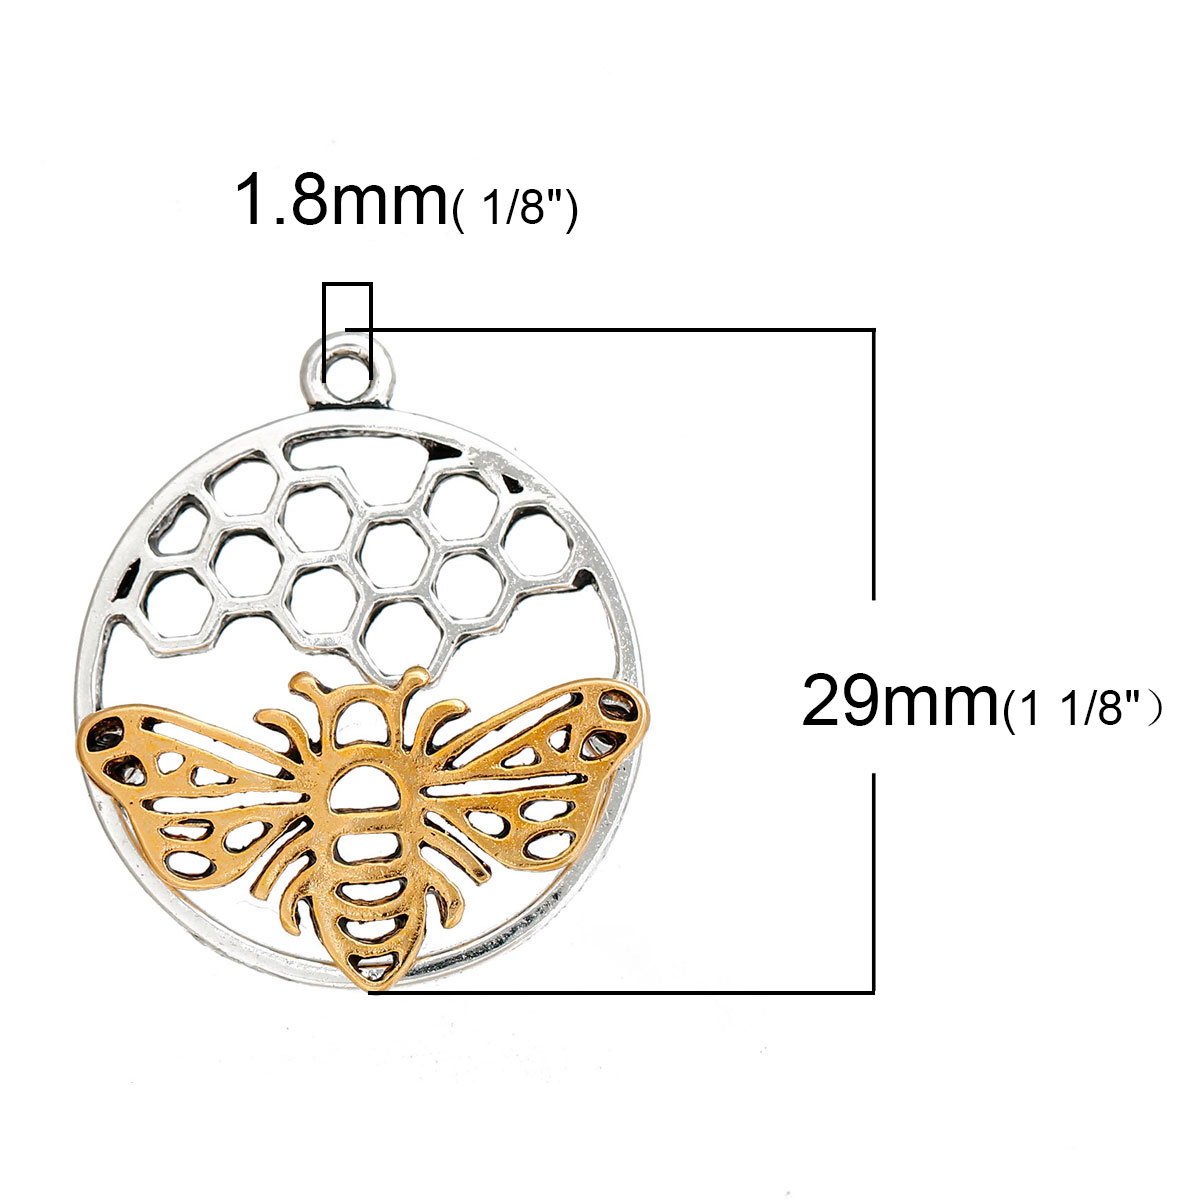 Picture of Zinc Based Alloy Charms Honeycomb Round Antique Silver & Gold Tone Antique Gold Bee Hollow 29mm(1 1/8") x 25mm(1"), 5 PCs